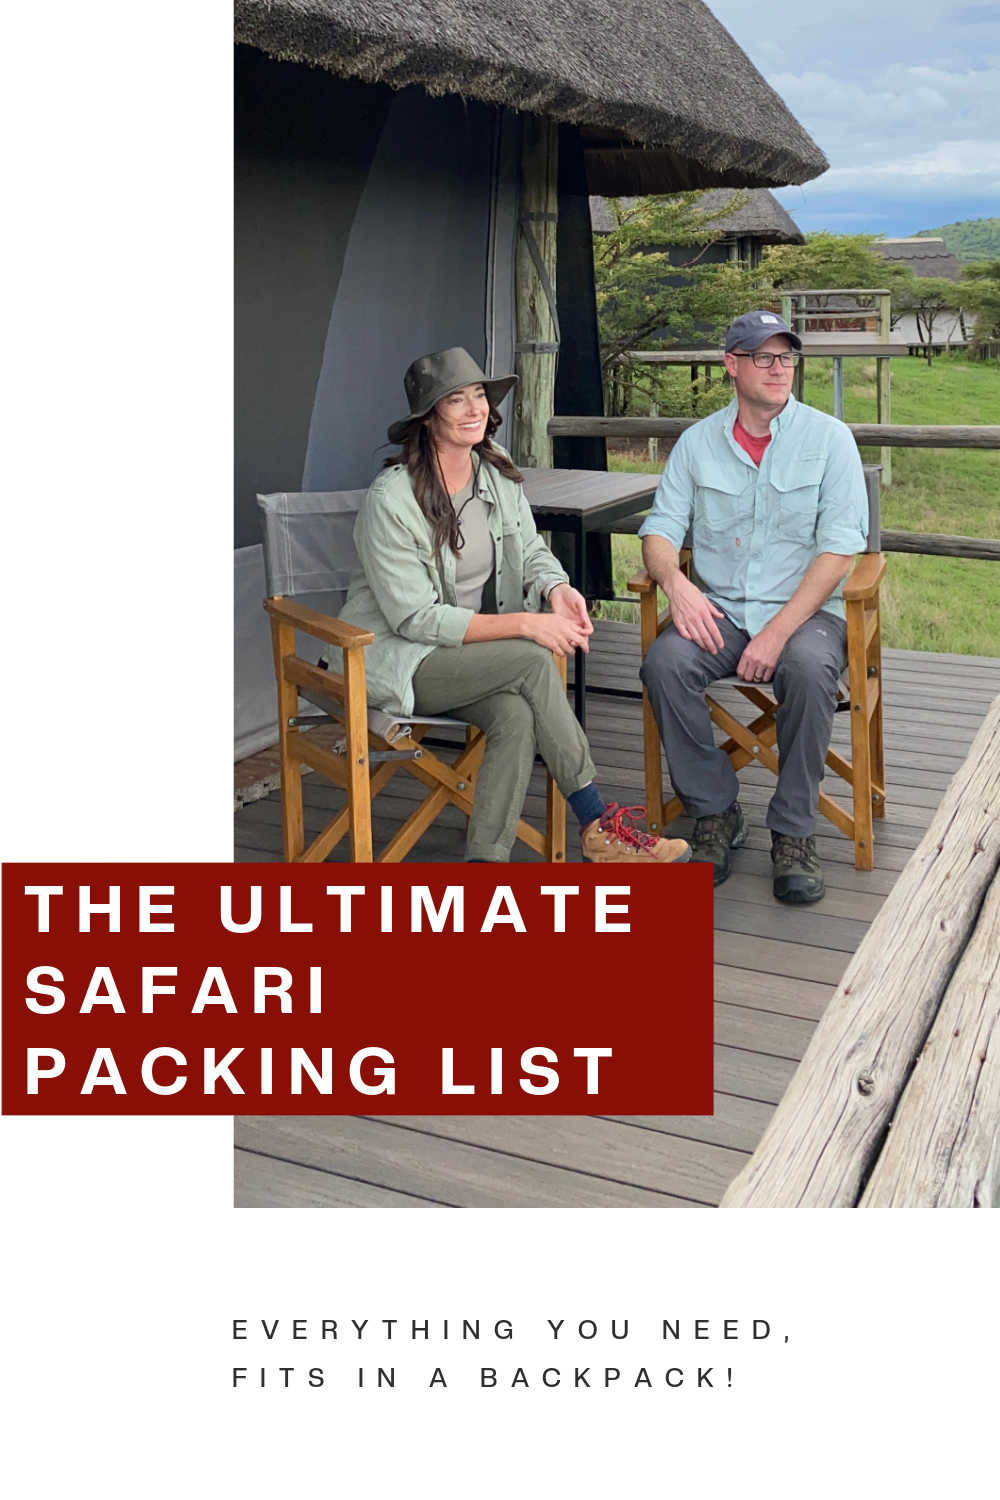 SAFARI PACKING LIST FOR COUPLES